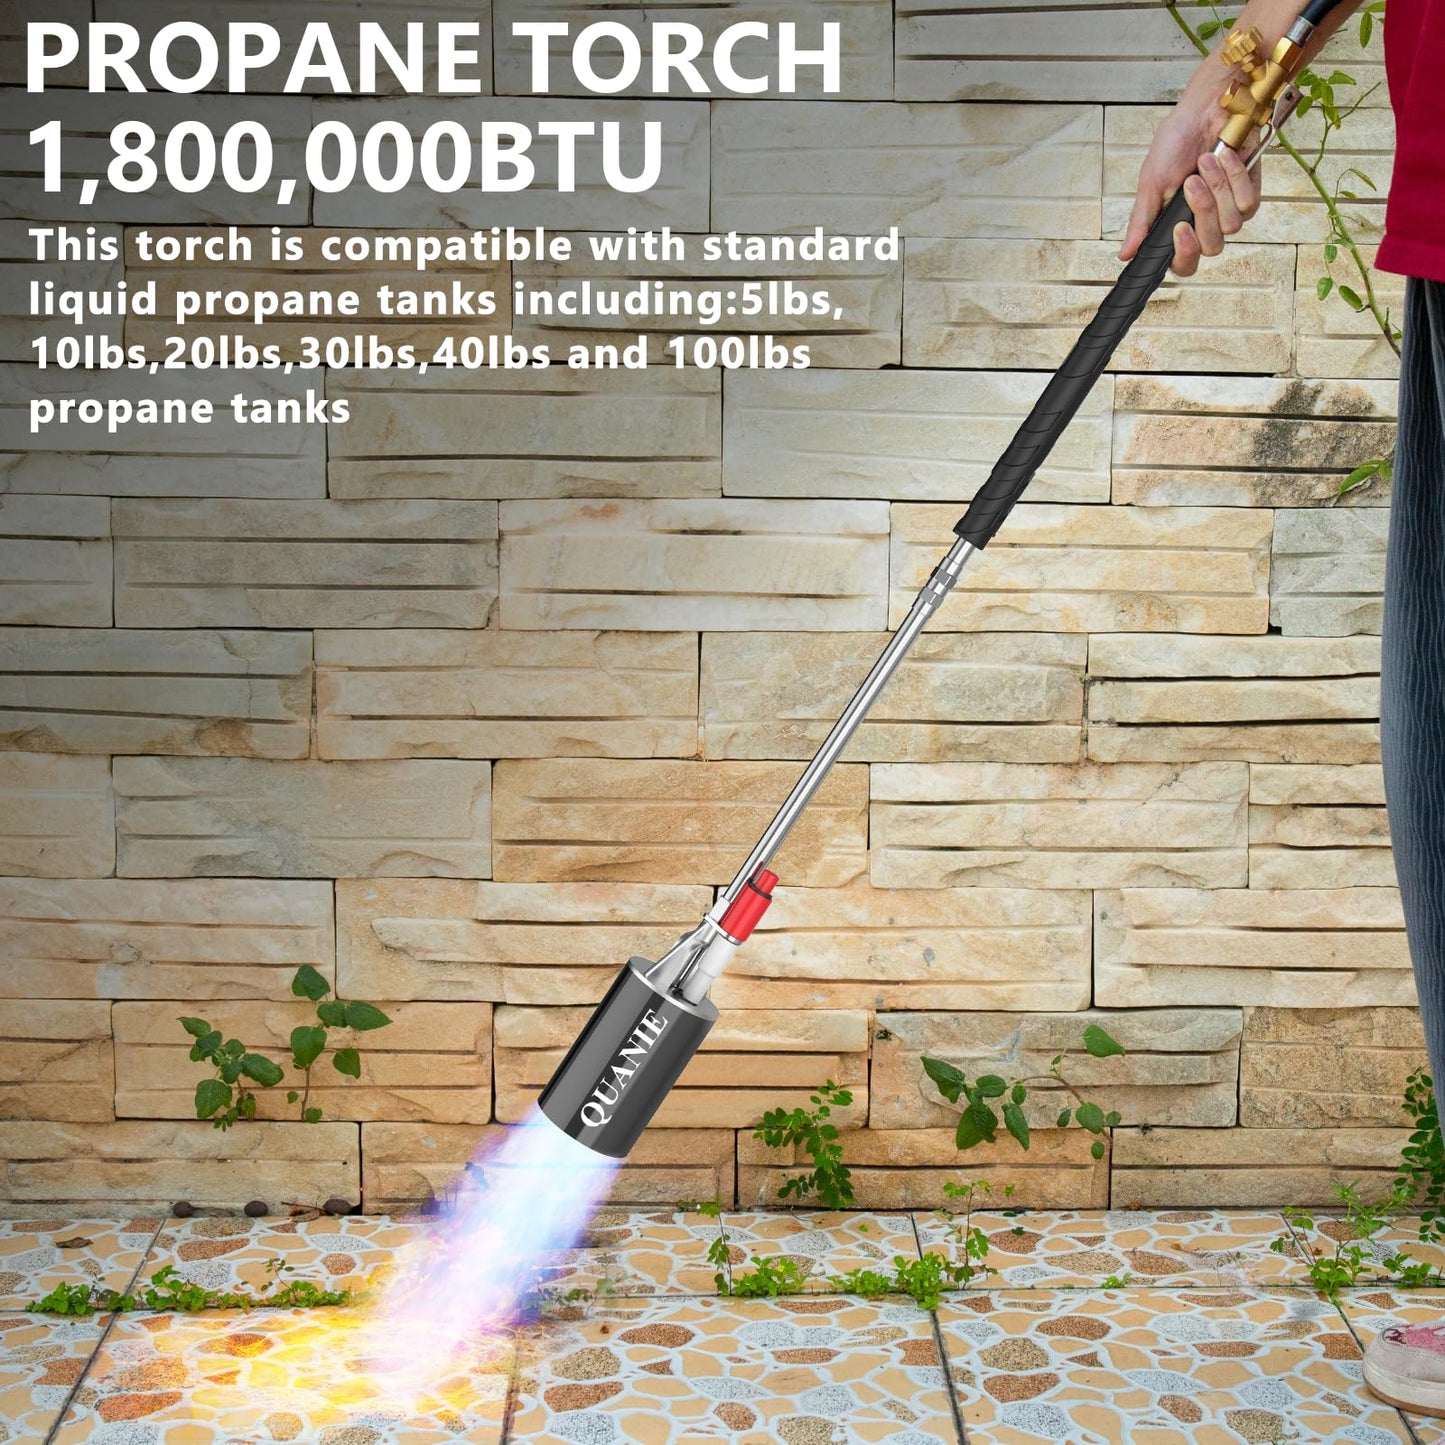 Propane Torch Weed Burner Kit, Blow Torch High Output 1,800,000 BTU with Self Igniter and Turbo-Blast Trigger,Heavy Duty Flamethrower with 10FT Hose for Weeding,Roof Asphalt,Ice Snow,Road Marking